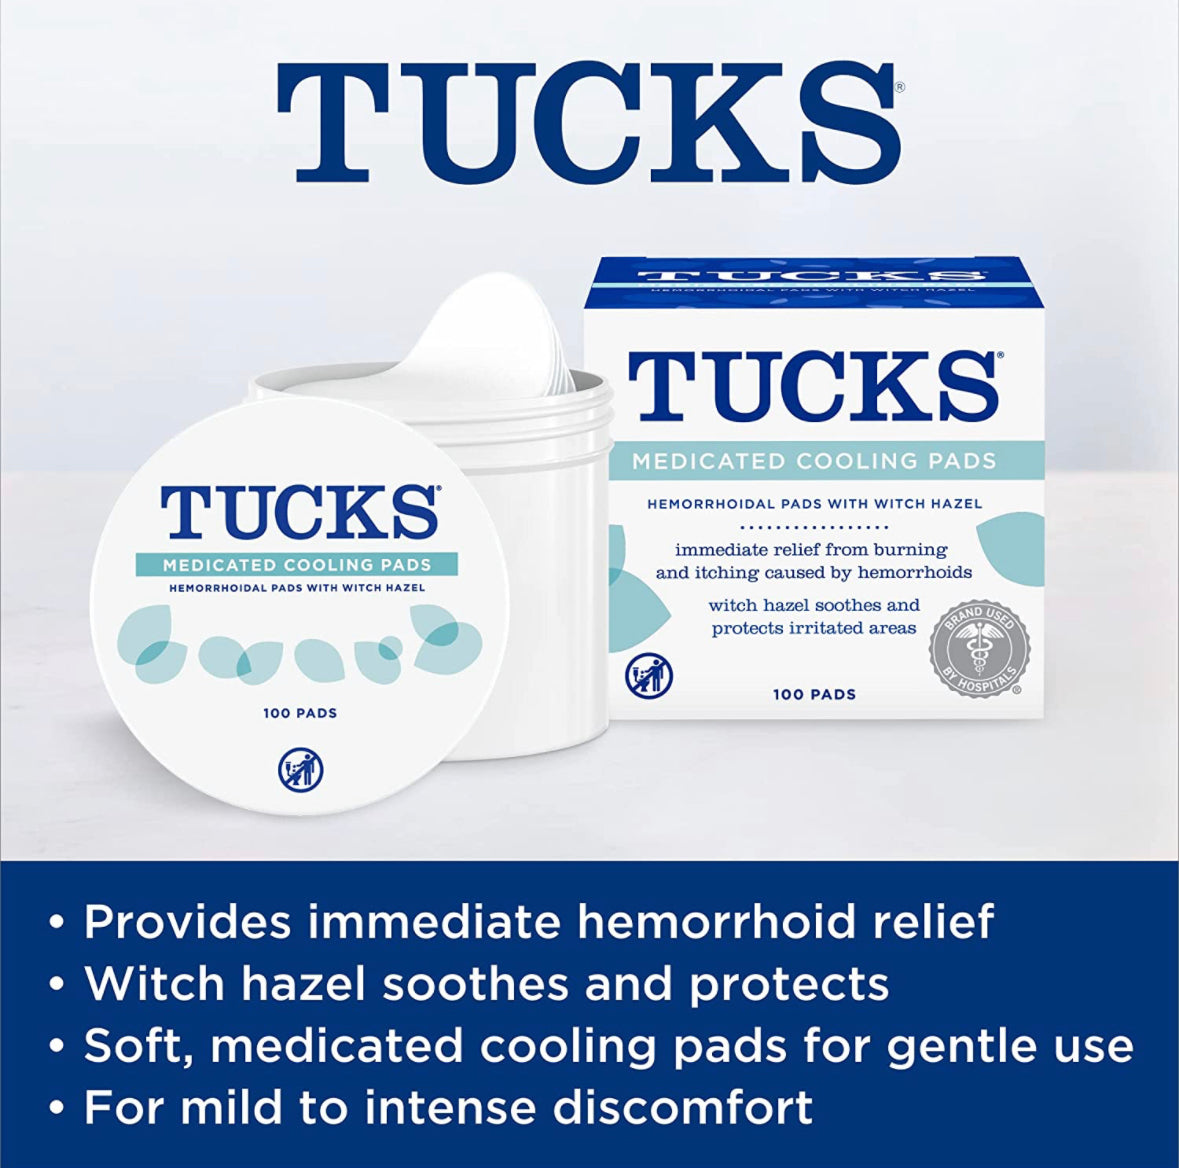 TUCKS Medicated Cooling Pads, 100 Count – Hemorrhoid Pads with Witch Hazel, Cleanses Sensitive Areas, Protects from Irritation, Hemorrhoid Treatment.